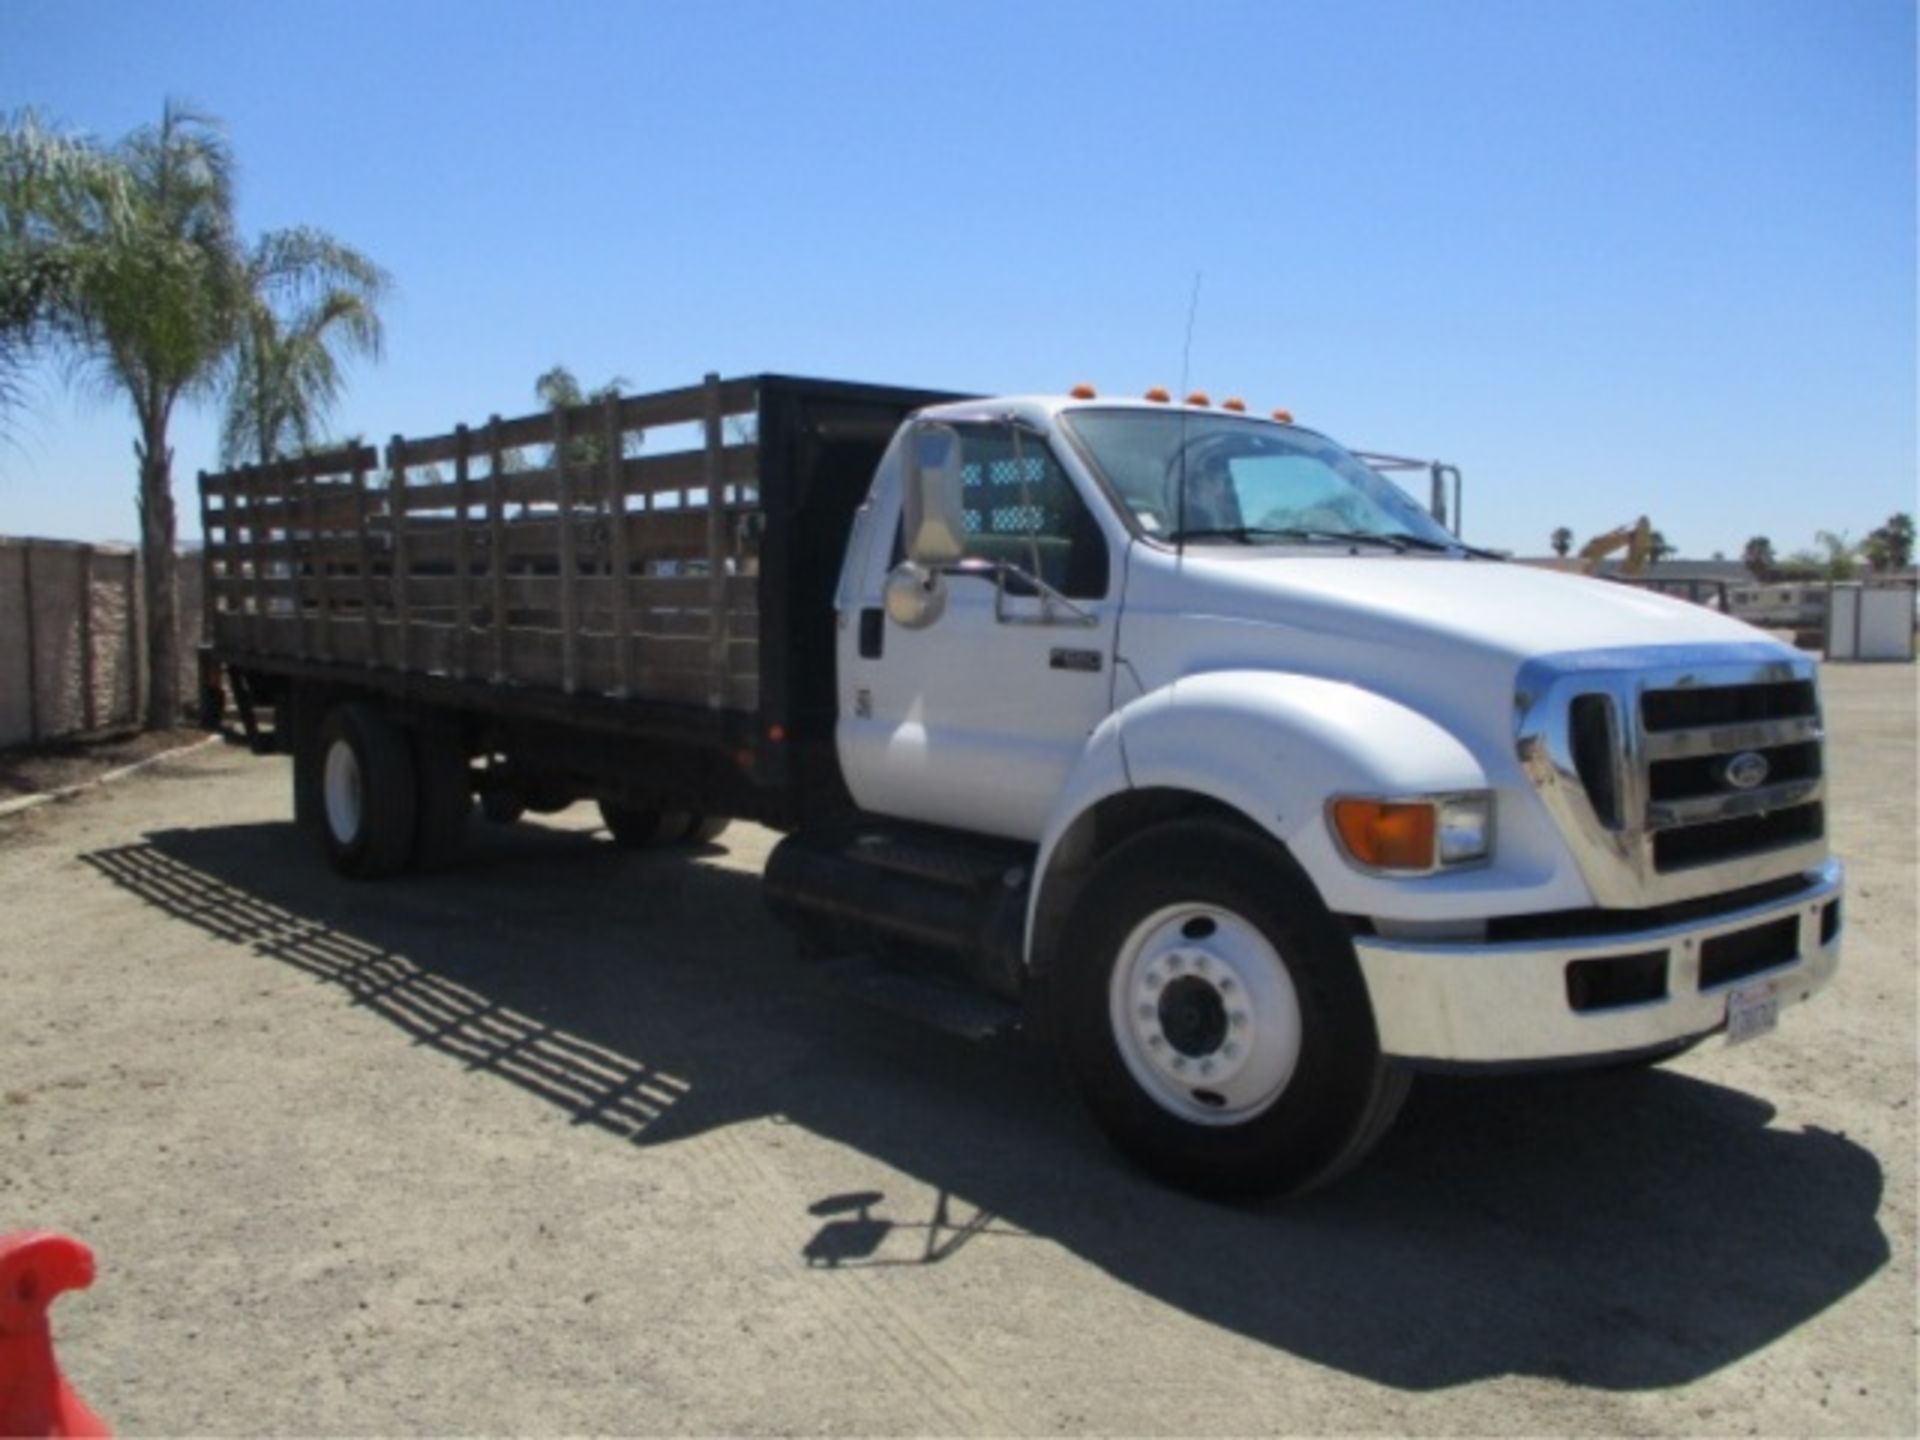 2005 Ford F650 S/A Flatbed Stakebed Truck, Cat C7 Acert 7.2L 6-Cyl Diesel, Automatic, Lift Gate, 24' - Image 10 of 61